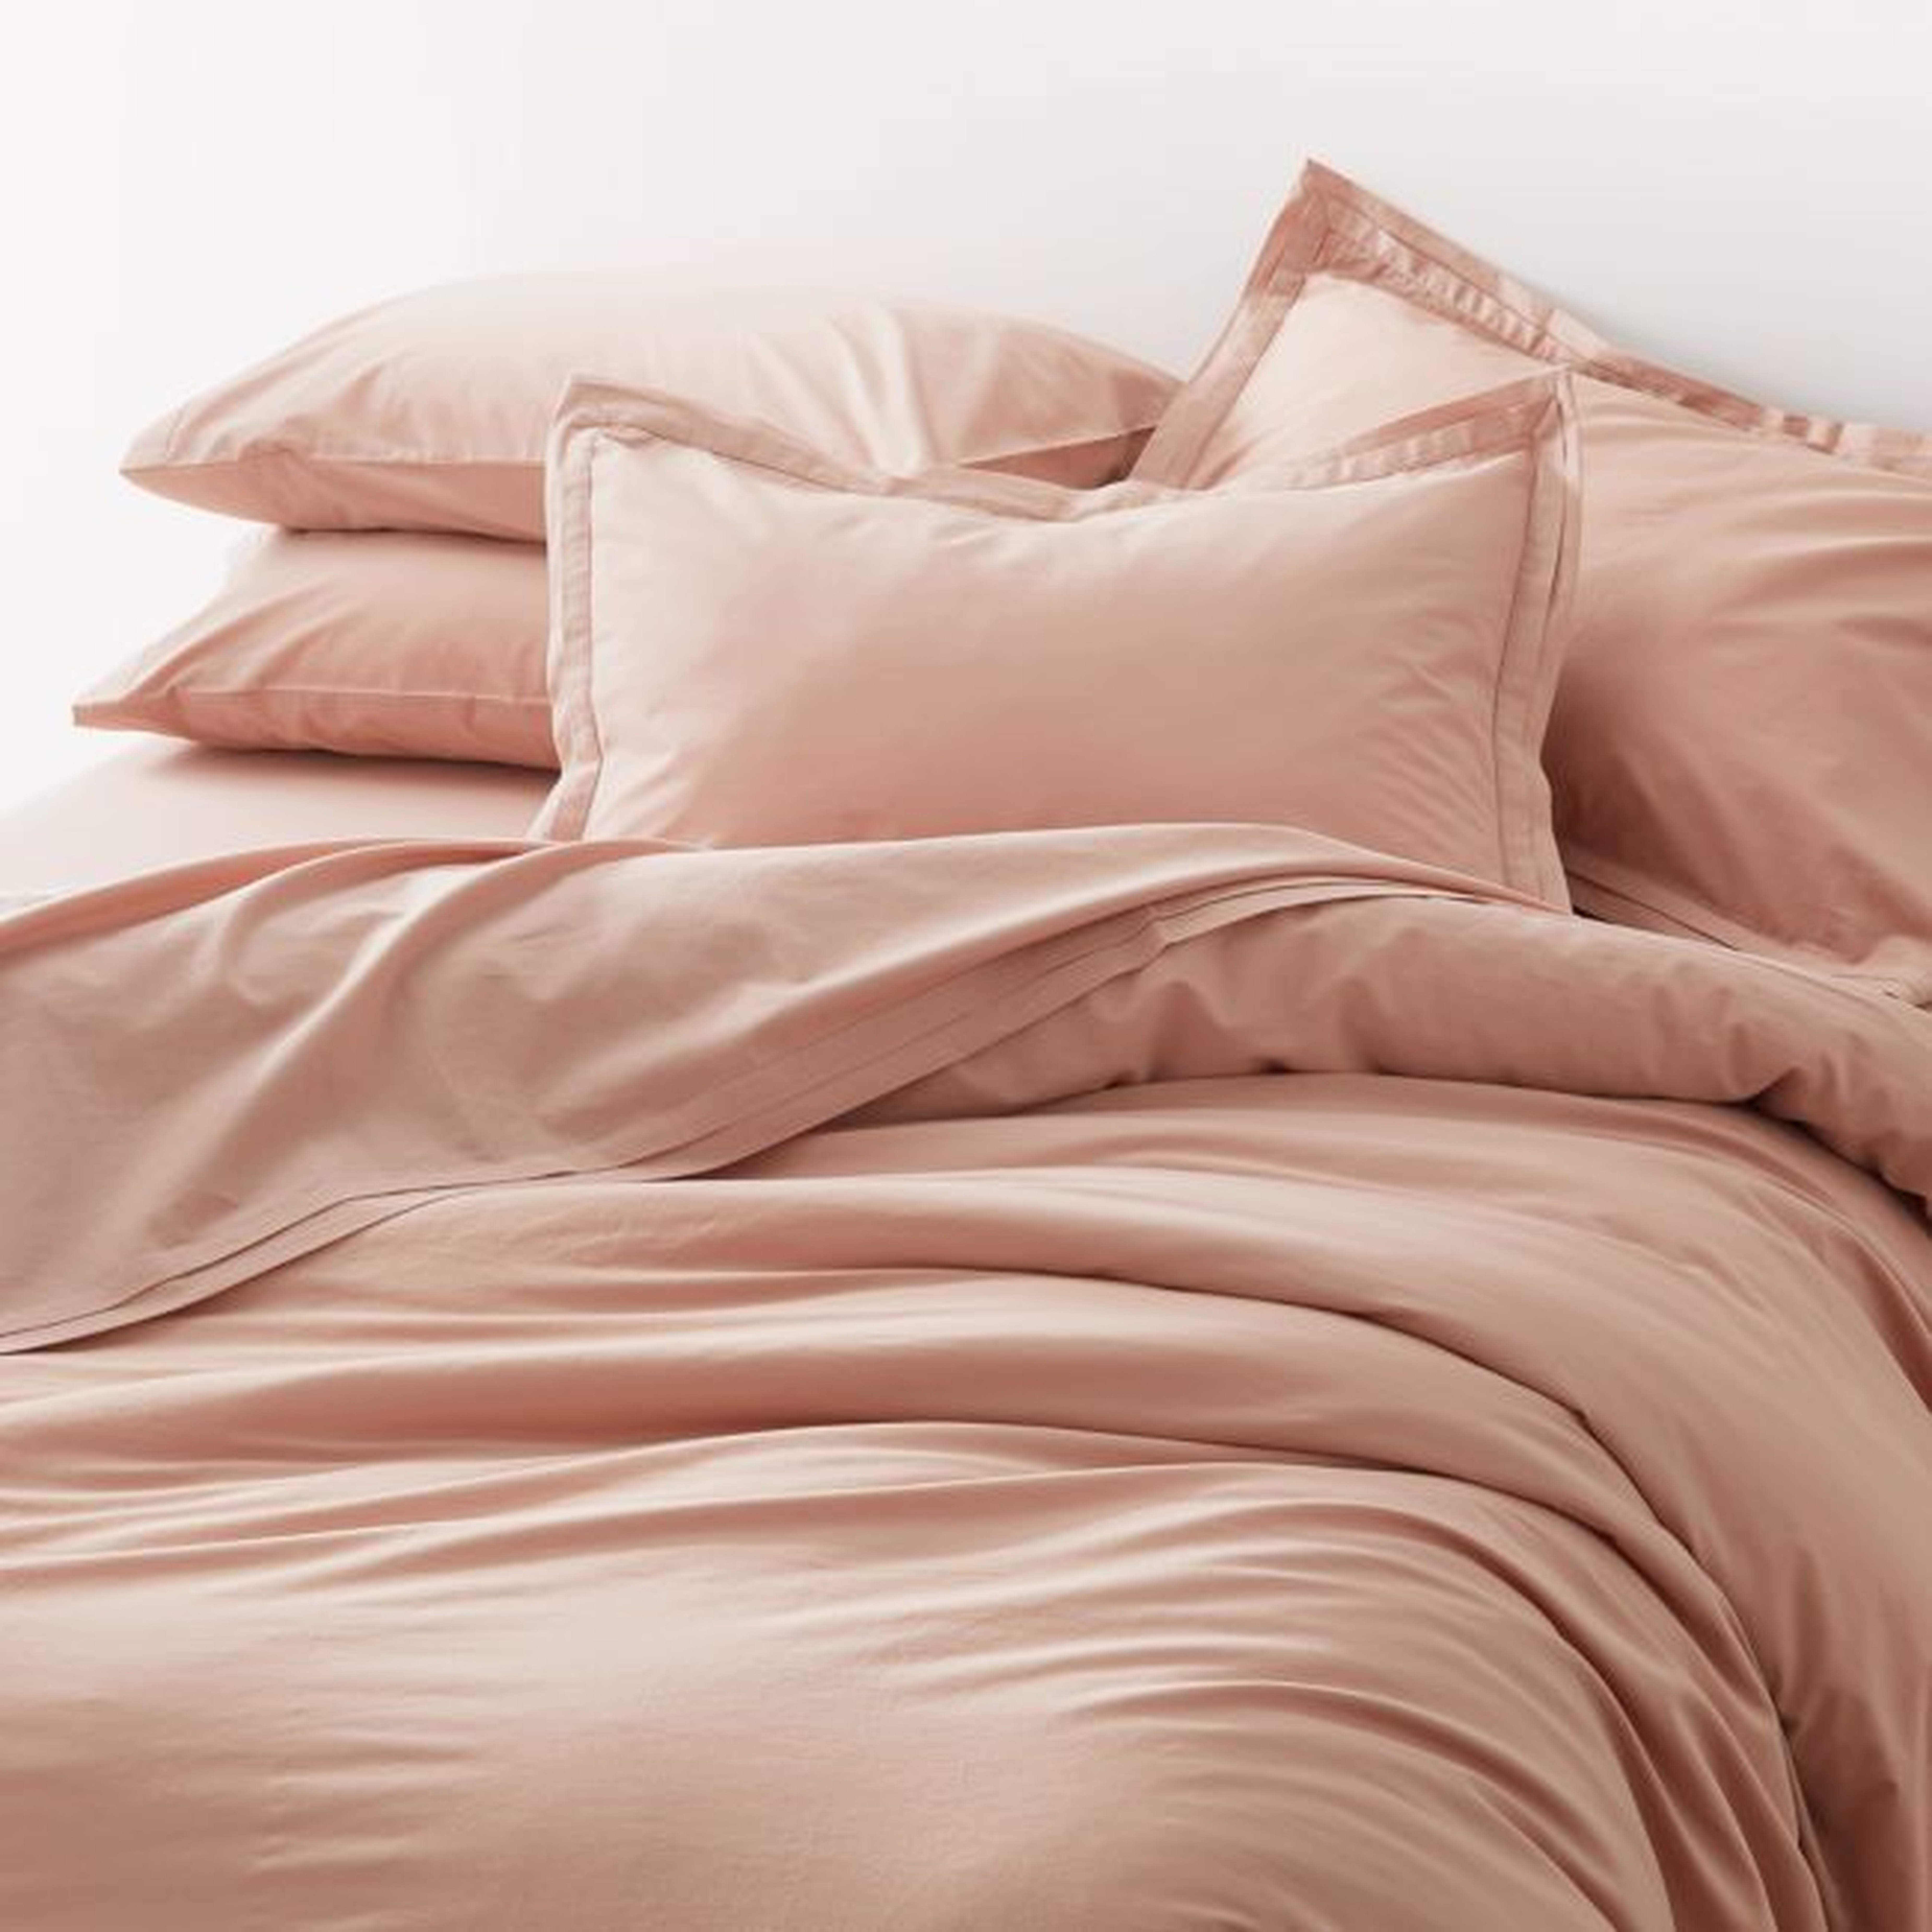 Mellow Blush Organic Cotton King Duvet Cover - Crate and Barrel